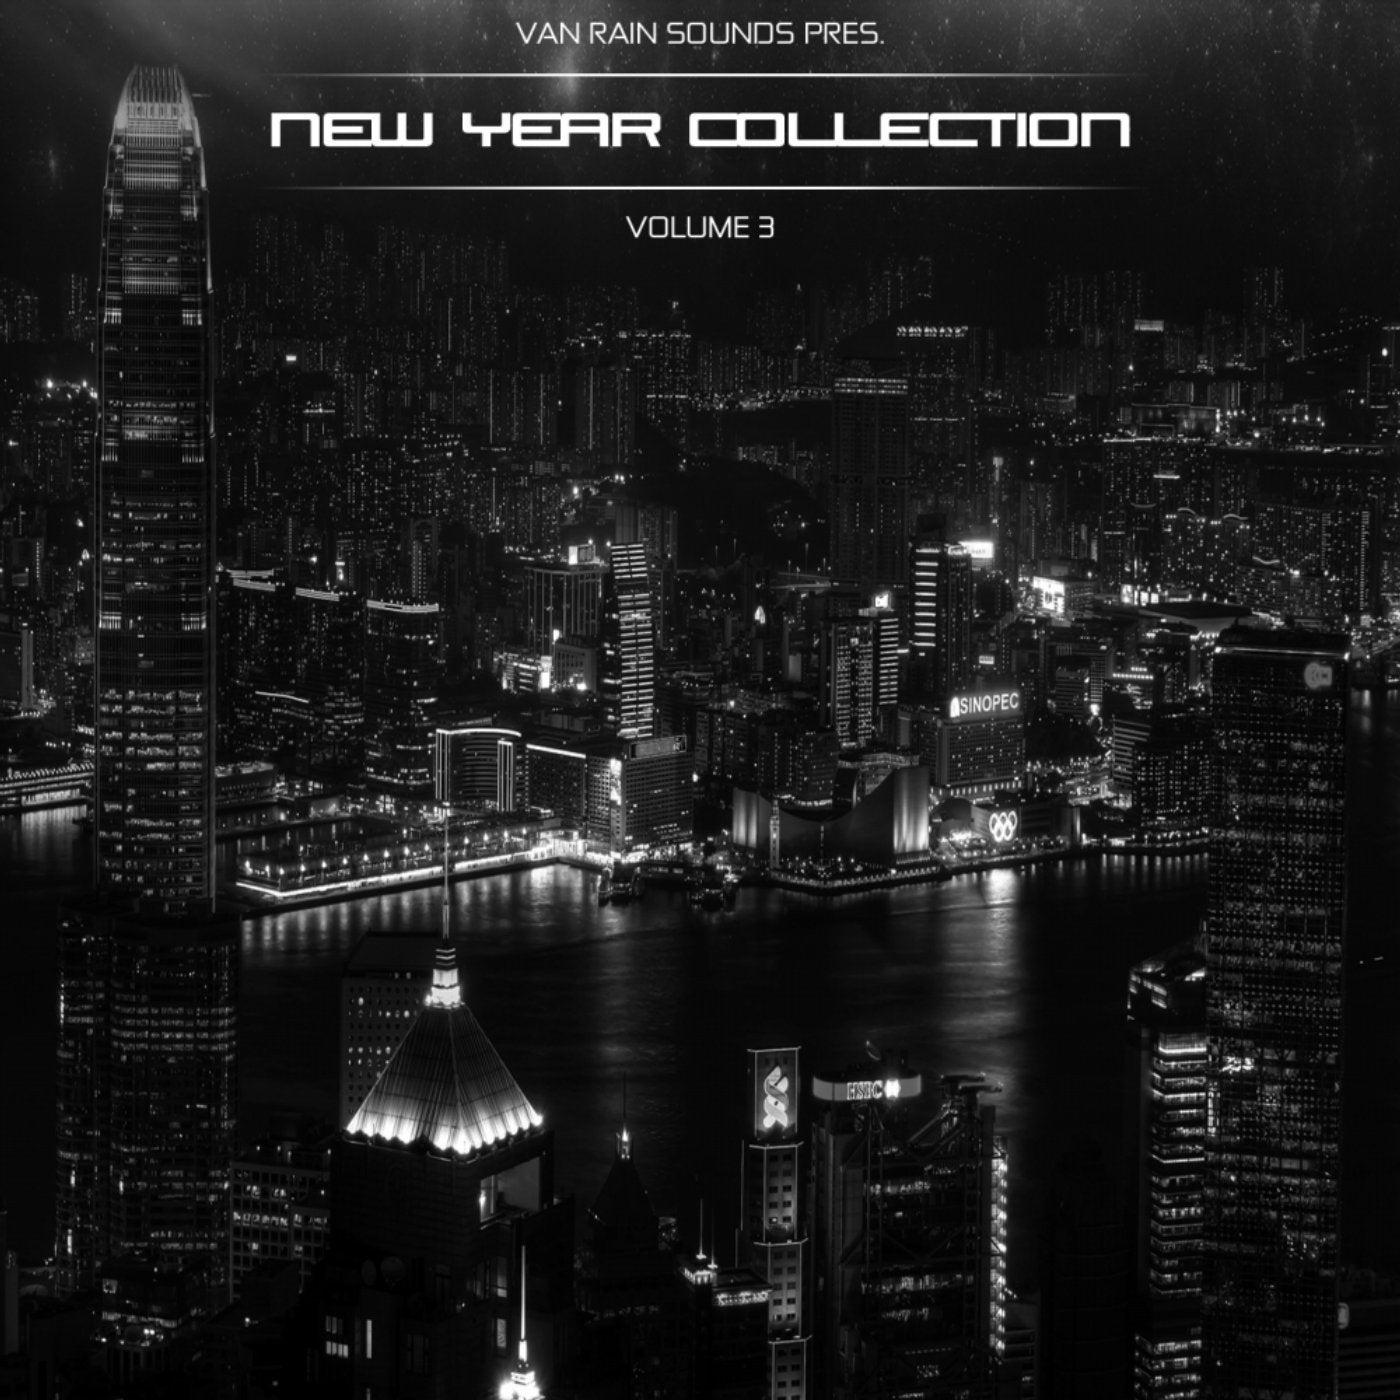 New Year Collection, Vol. 3